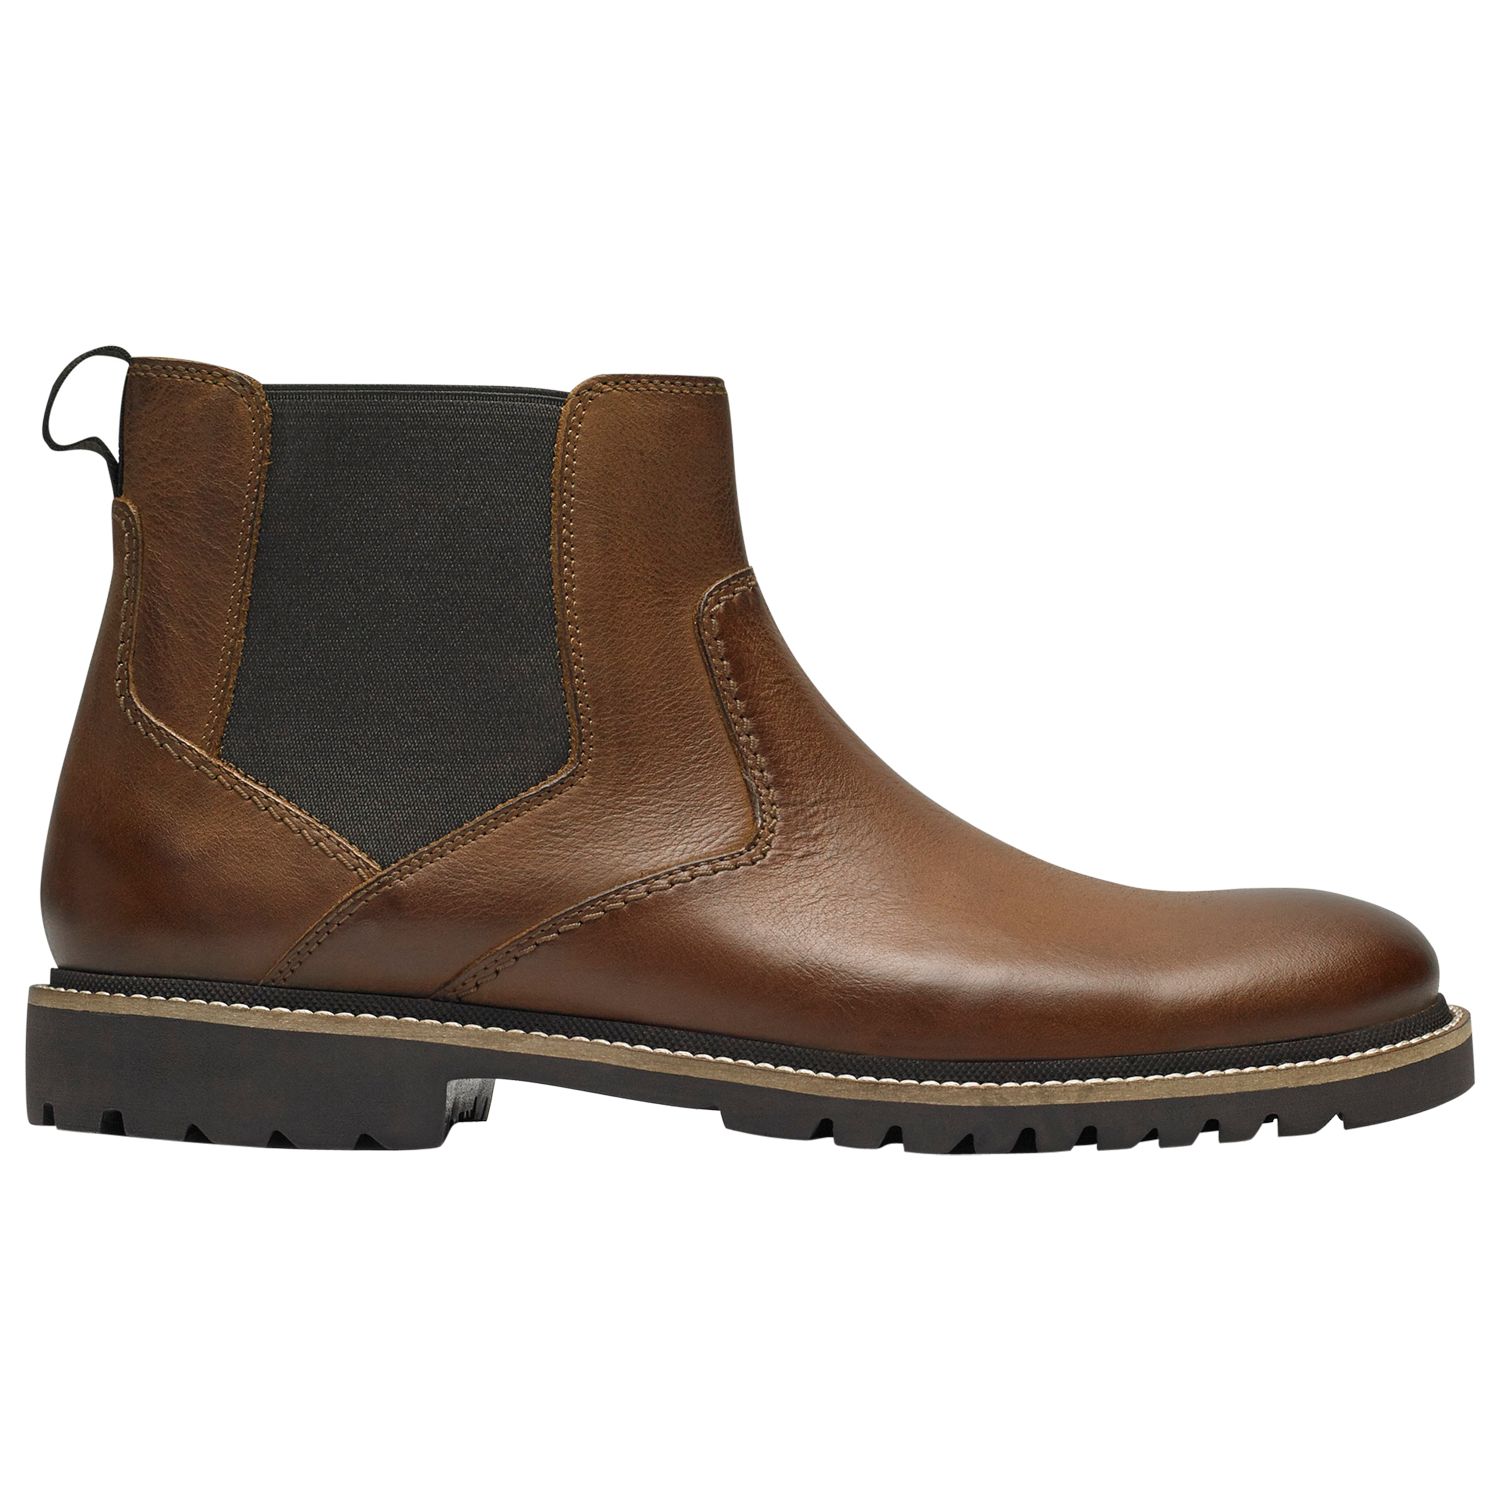 Rockport Marshall Chelsea Boots, Fawn